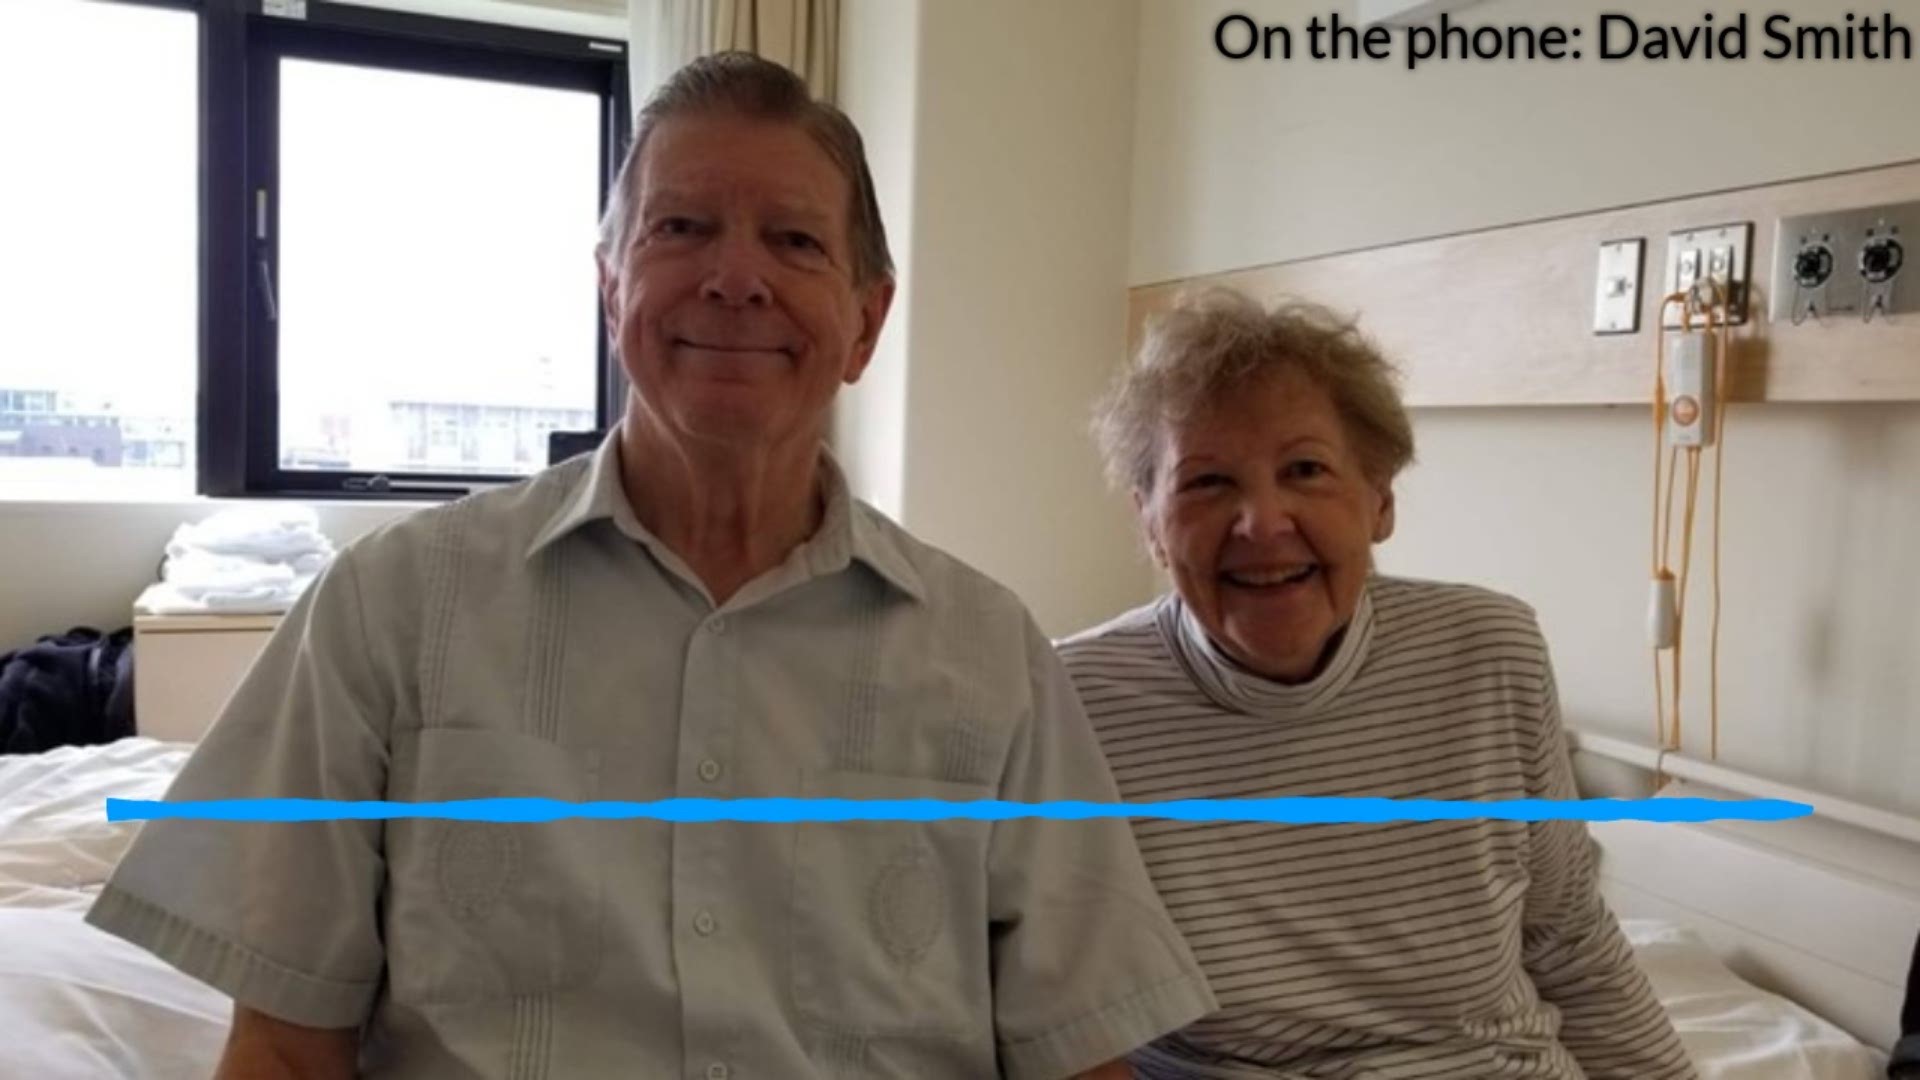 An 80-year-old Georgia couple, who were among dozens that tested positive for the new coronavirus on a cruise ship, is not heading home yet